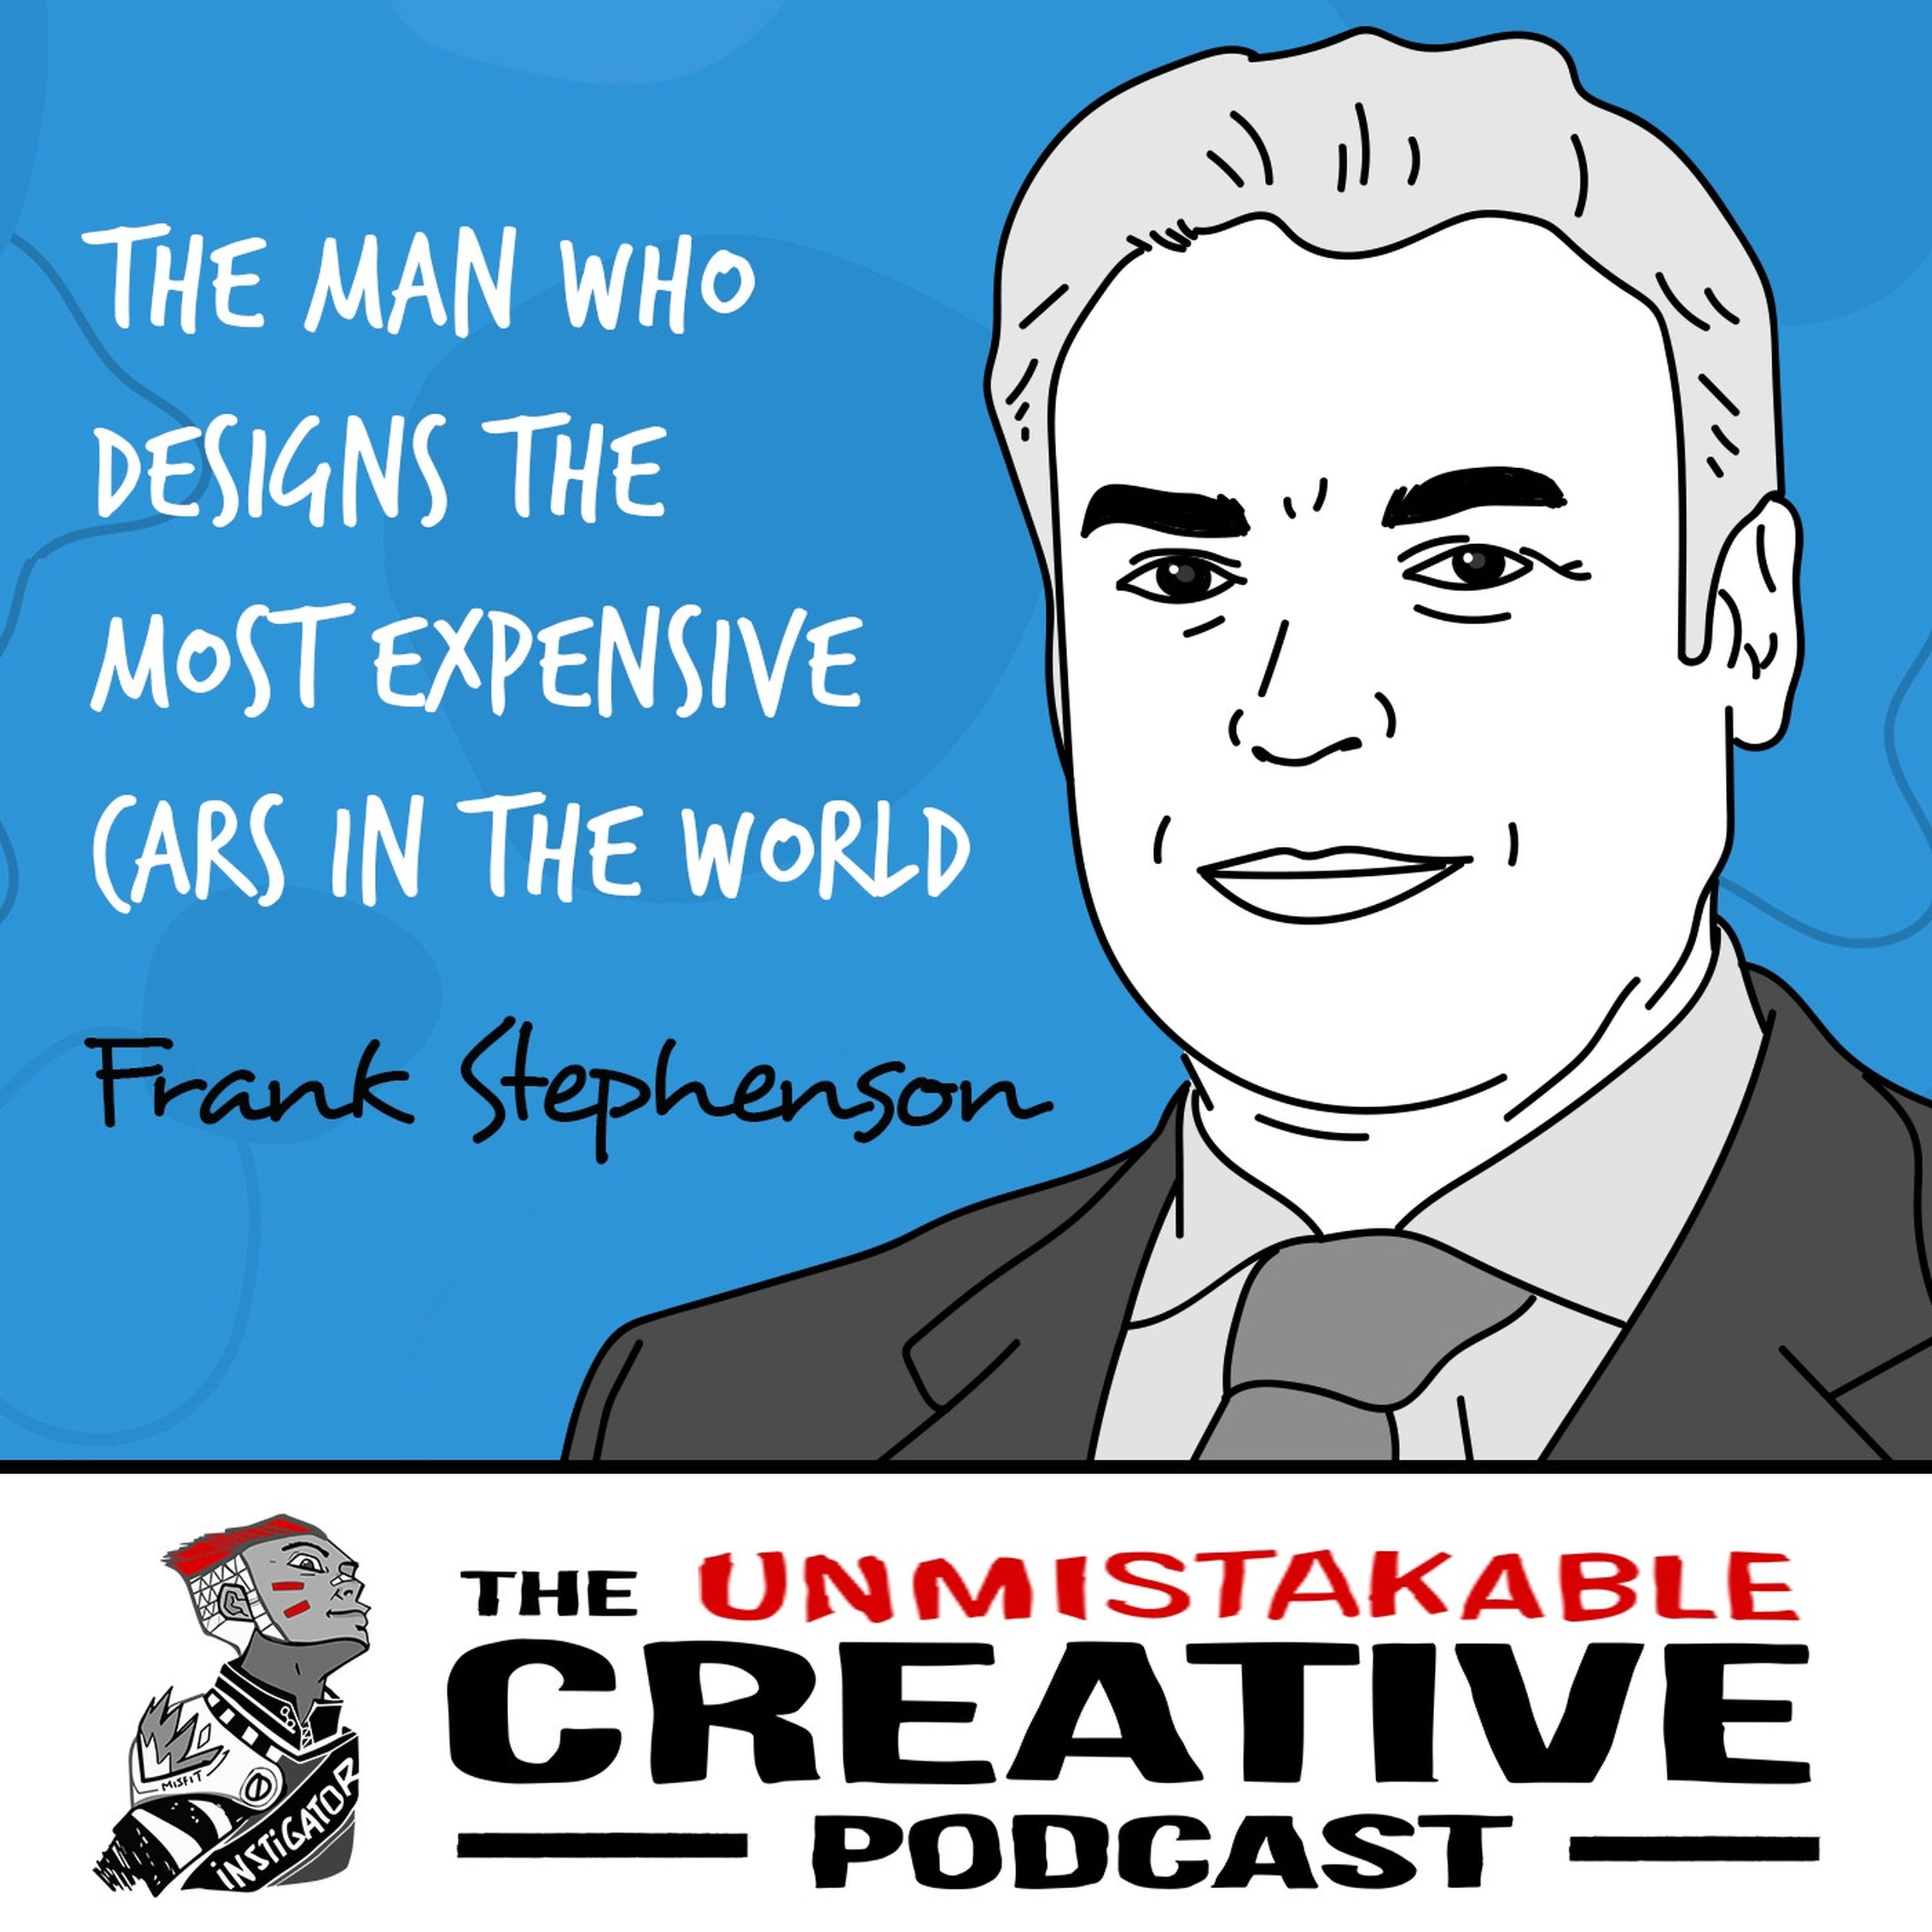 Best of 2020: Frank Stephenson | The Man Who Designs the Most Expensive Cars in The World Image